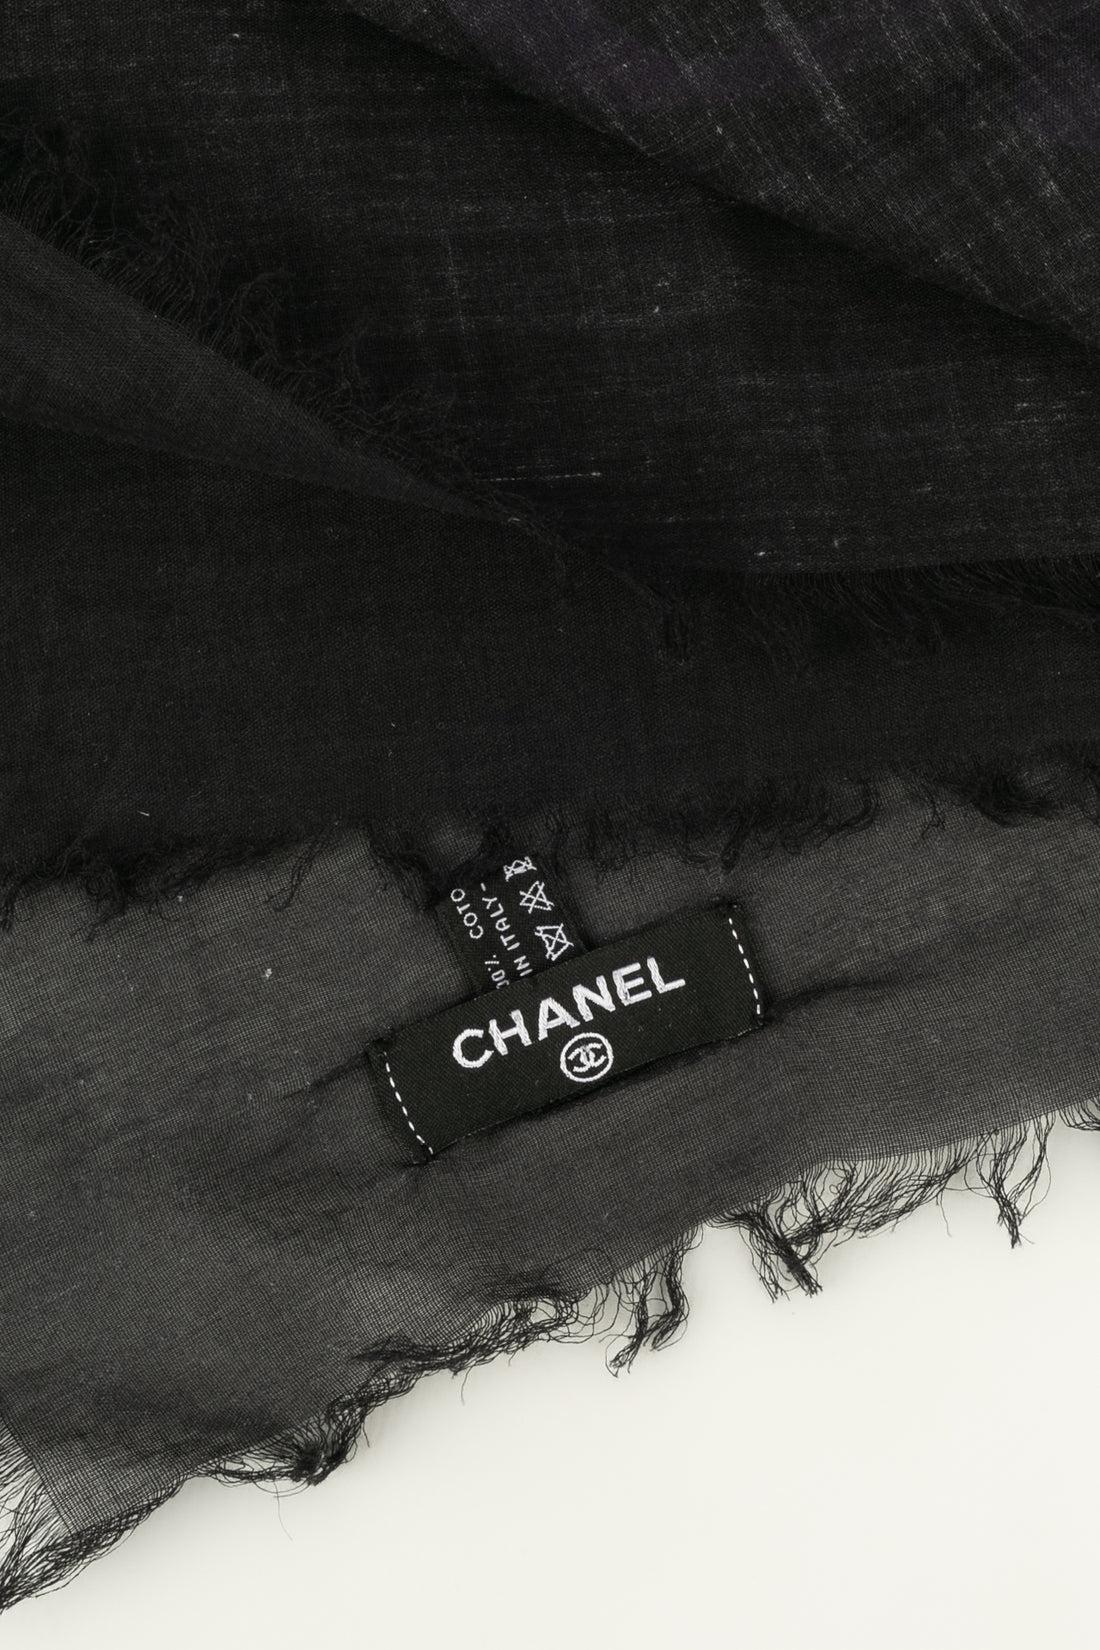 Chanel Adjustable Cap and Cotton Pareo Set For Sale 6